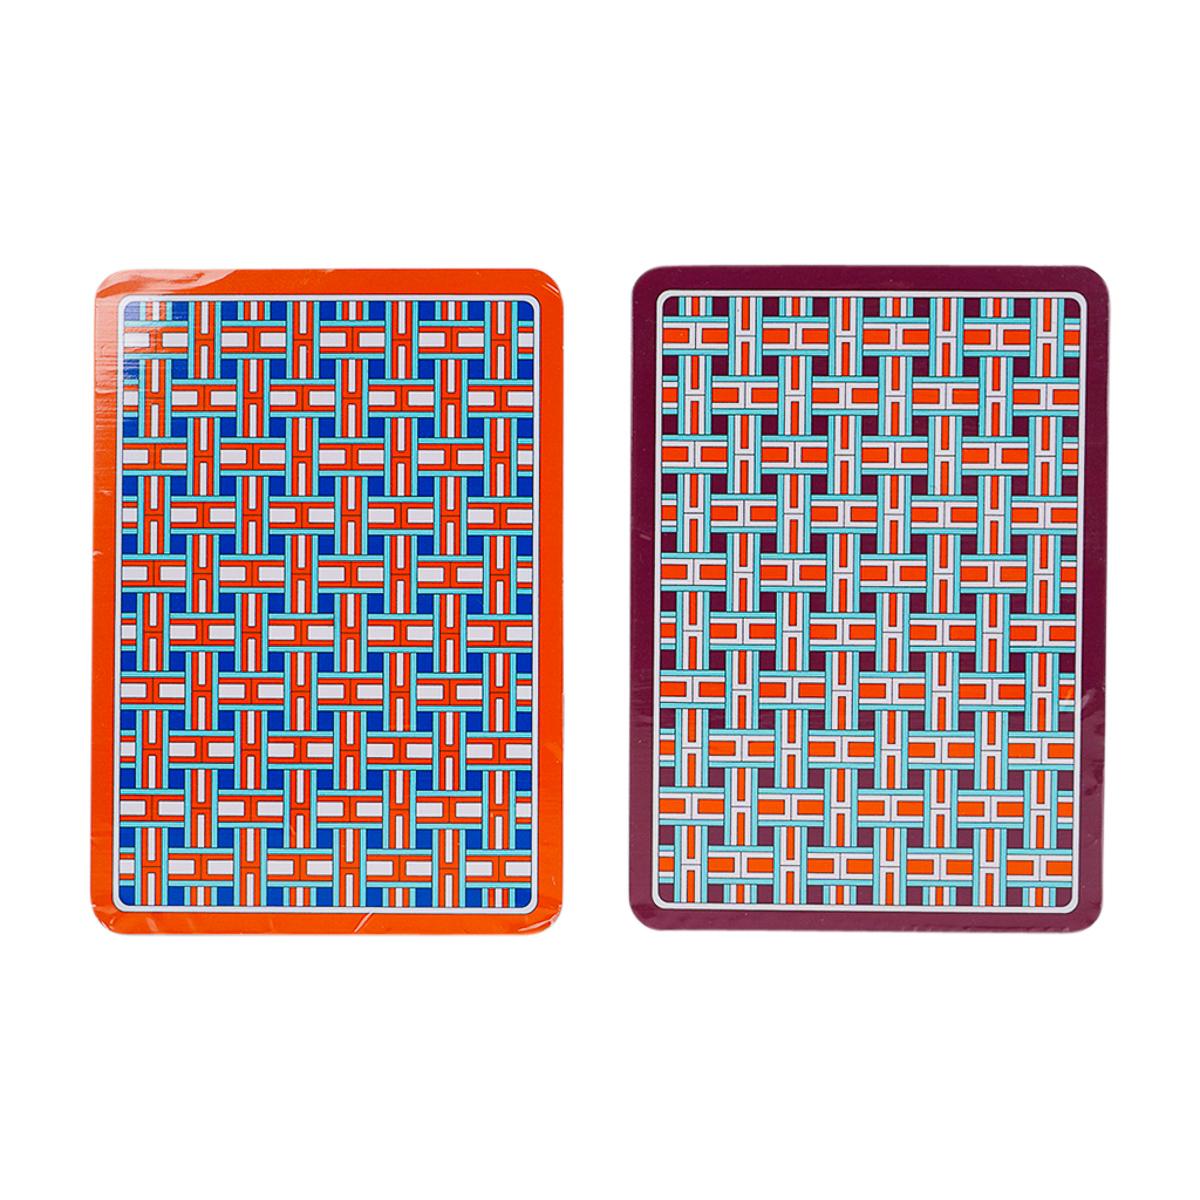 Mightychic offers Hermes Playing Cards.
The 2 sets are multicolored depicting a basket weave design - a fresh take on the 